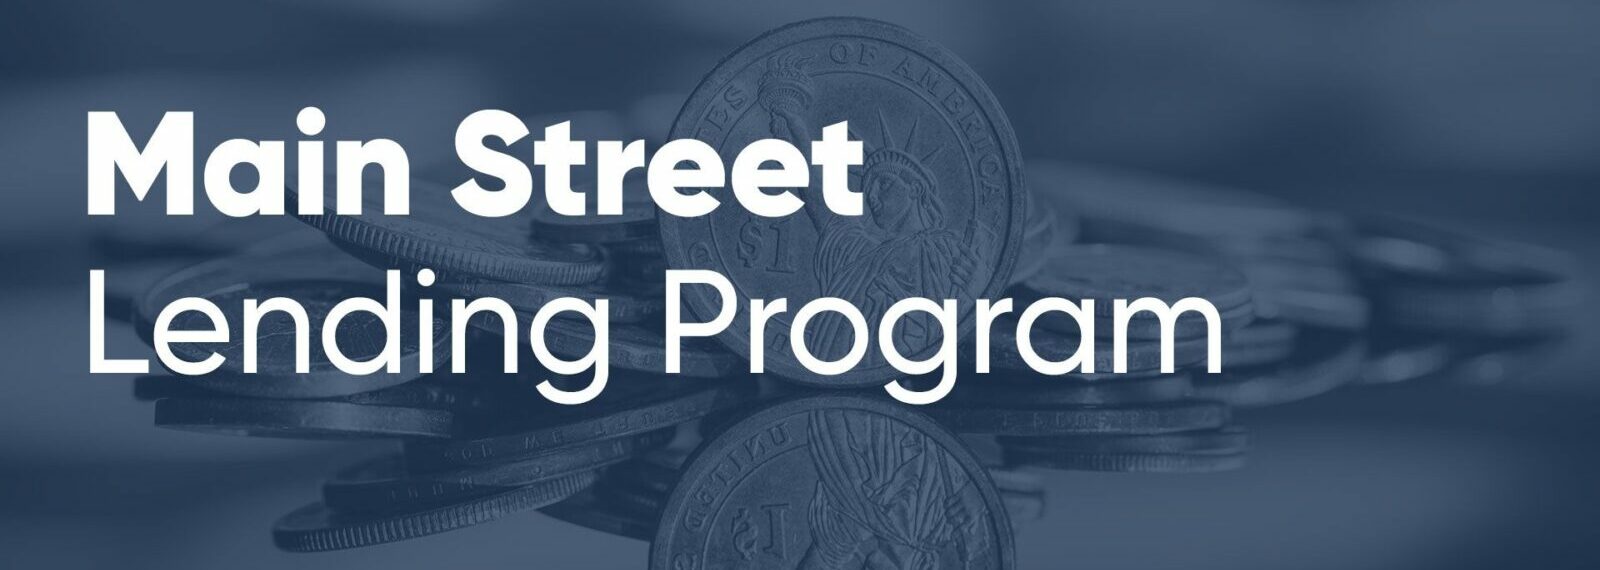 Frequently asked questions about Main Street Lending Program